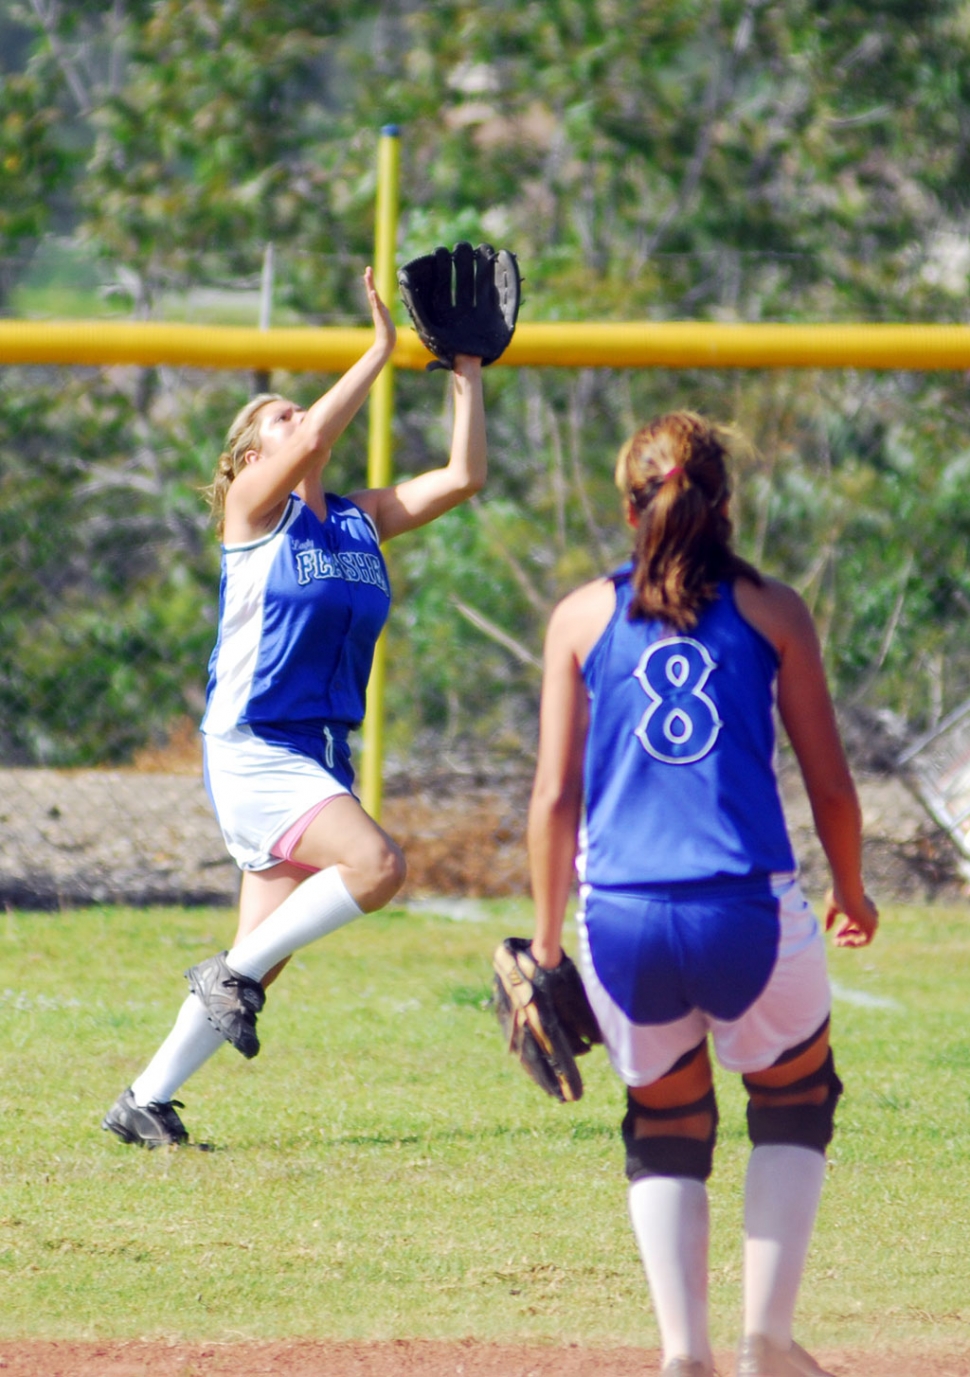 Tiffany Gonzales makes a great catch in right field.